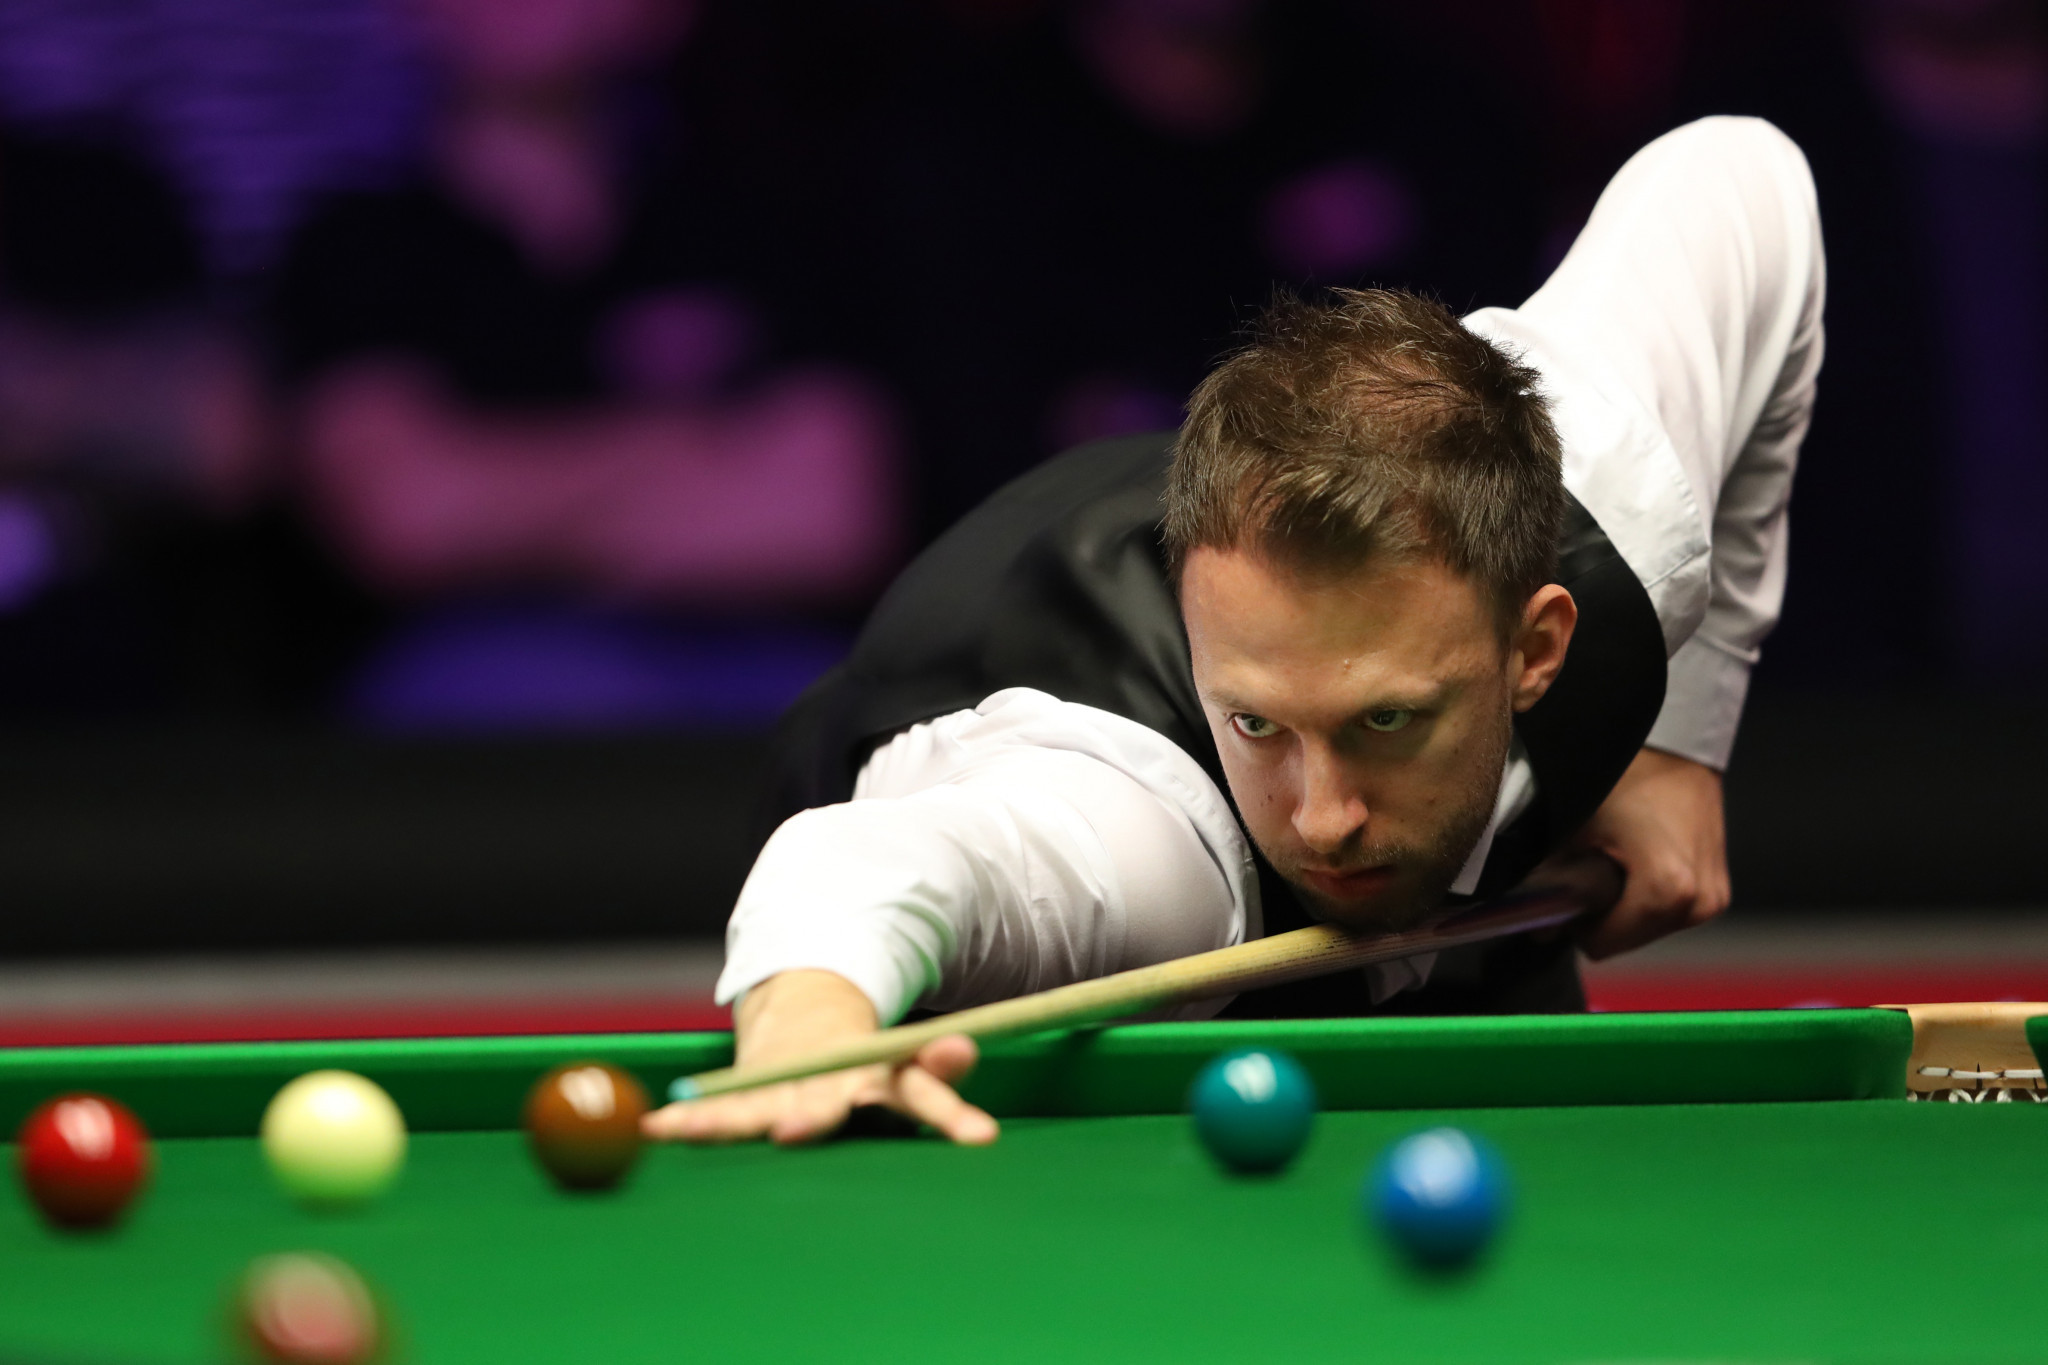 Snooker is another sport aiming for inclusion at Paris 2024 ©Getty Images